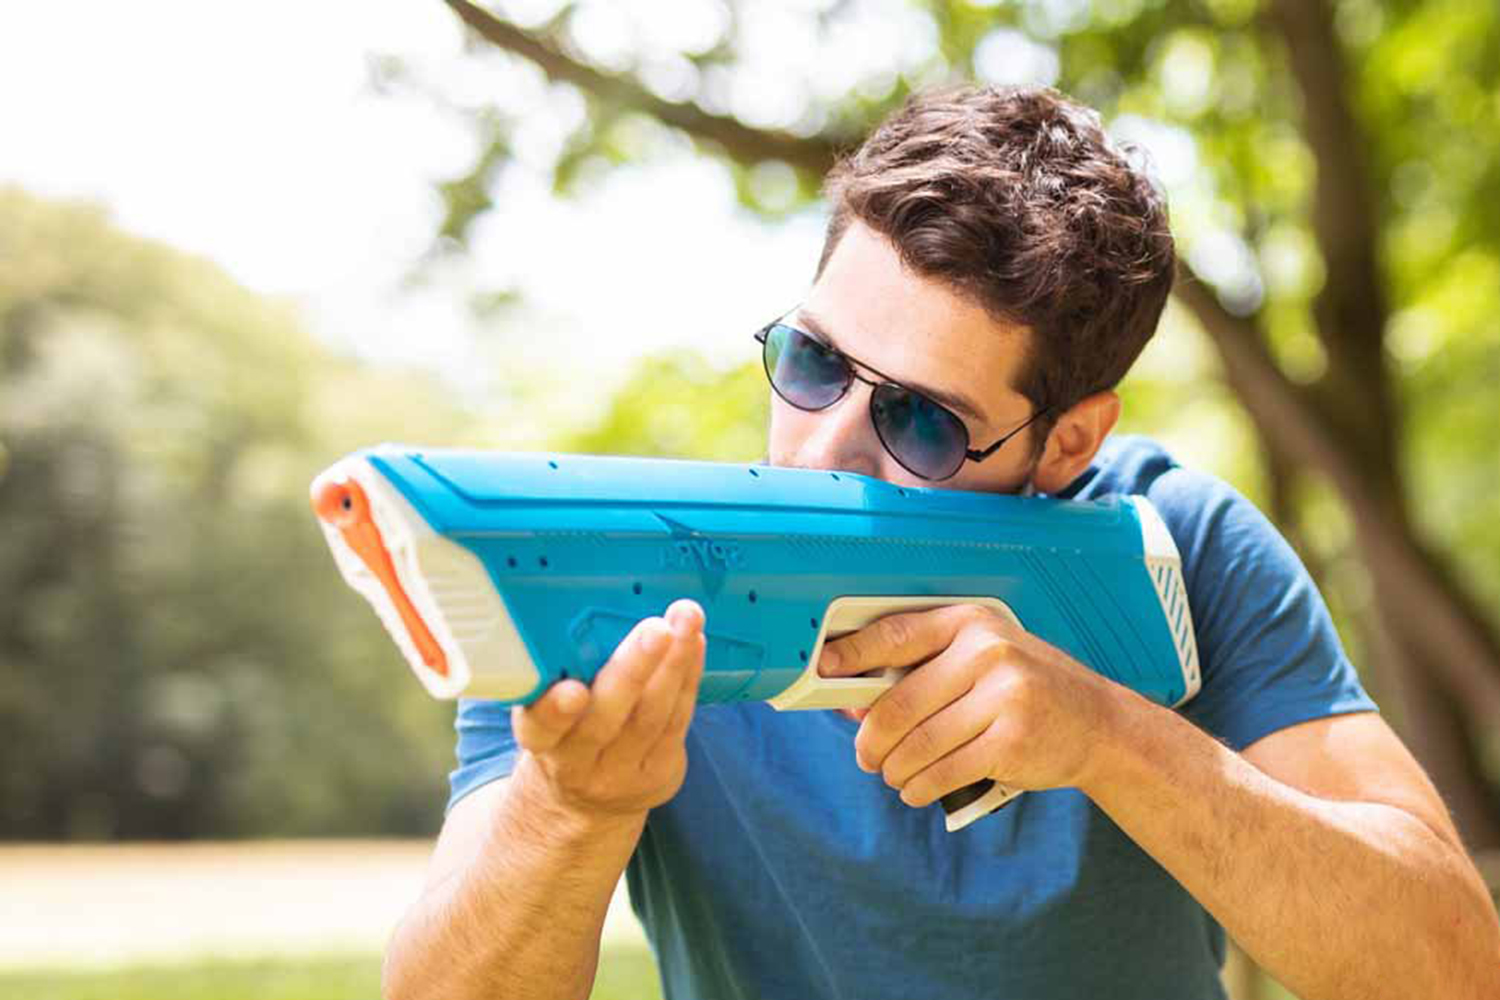 These are the best water guns and blasters (they're not just for